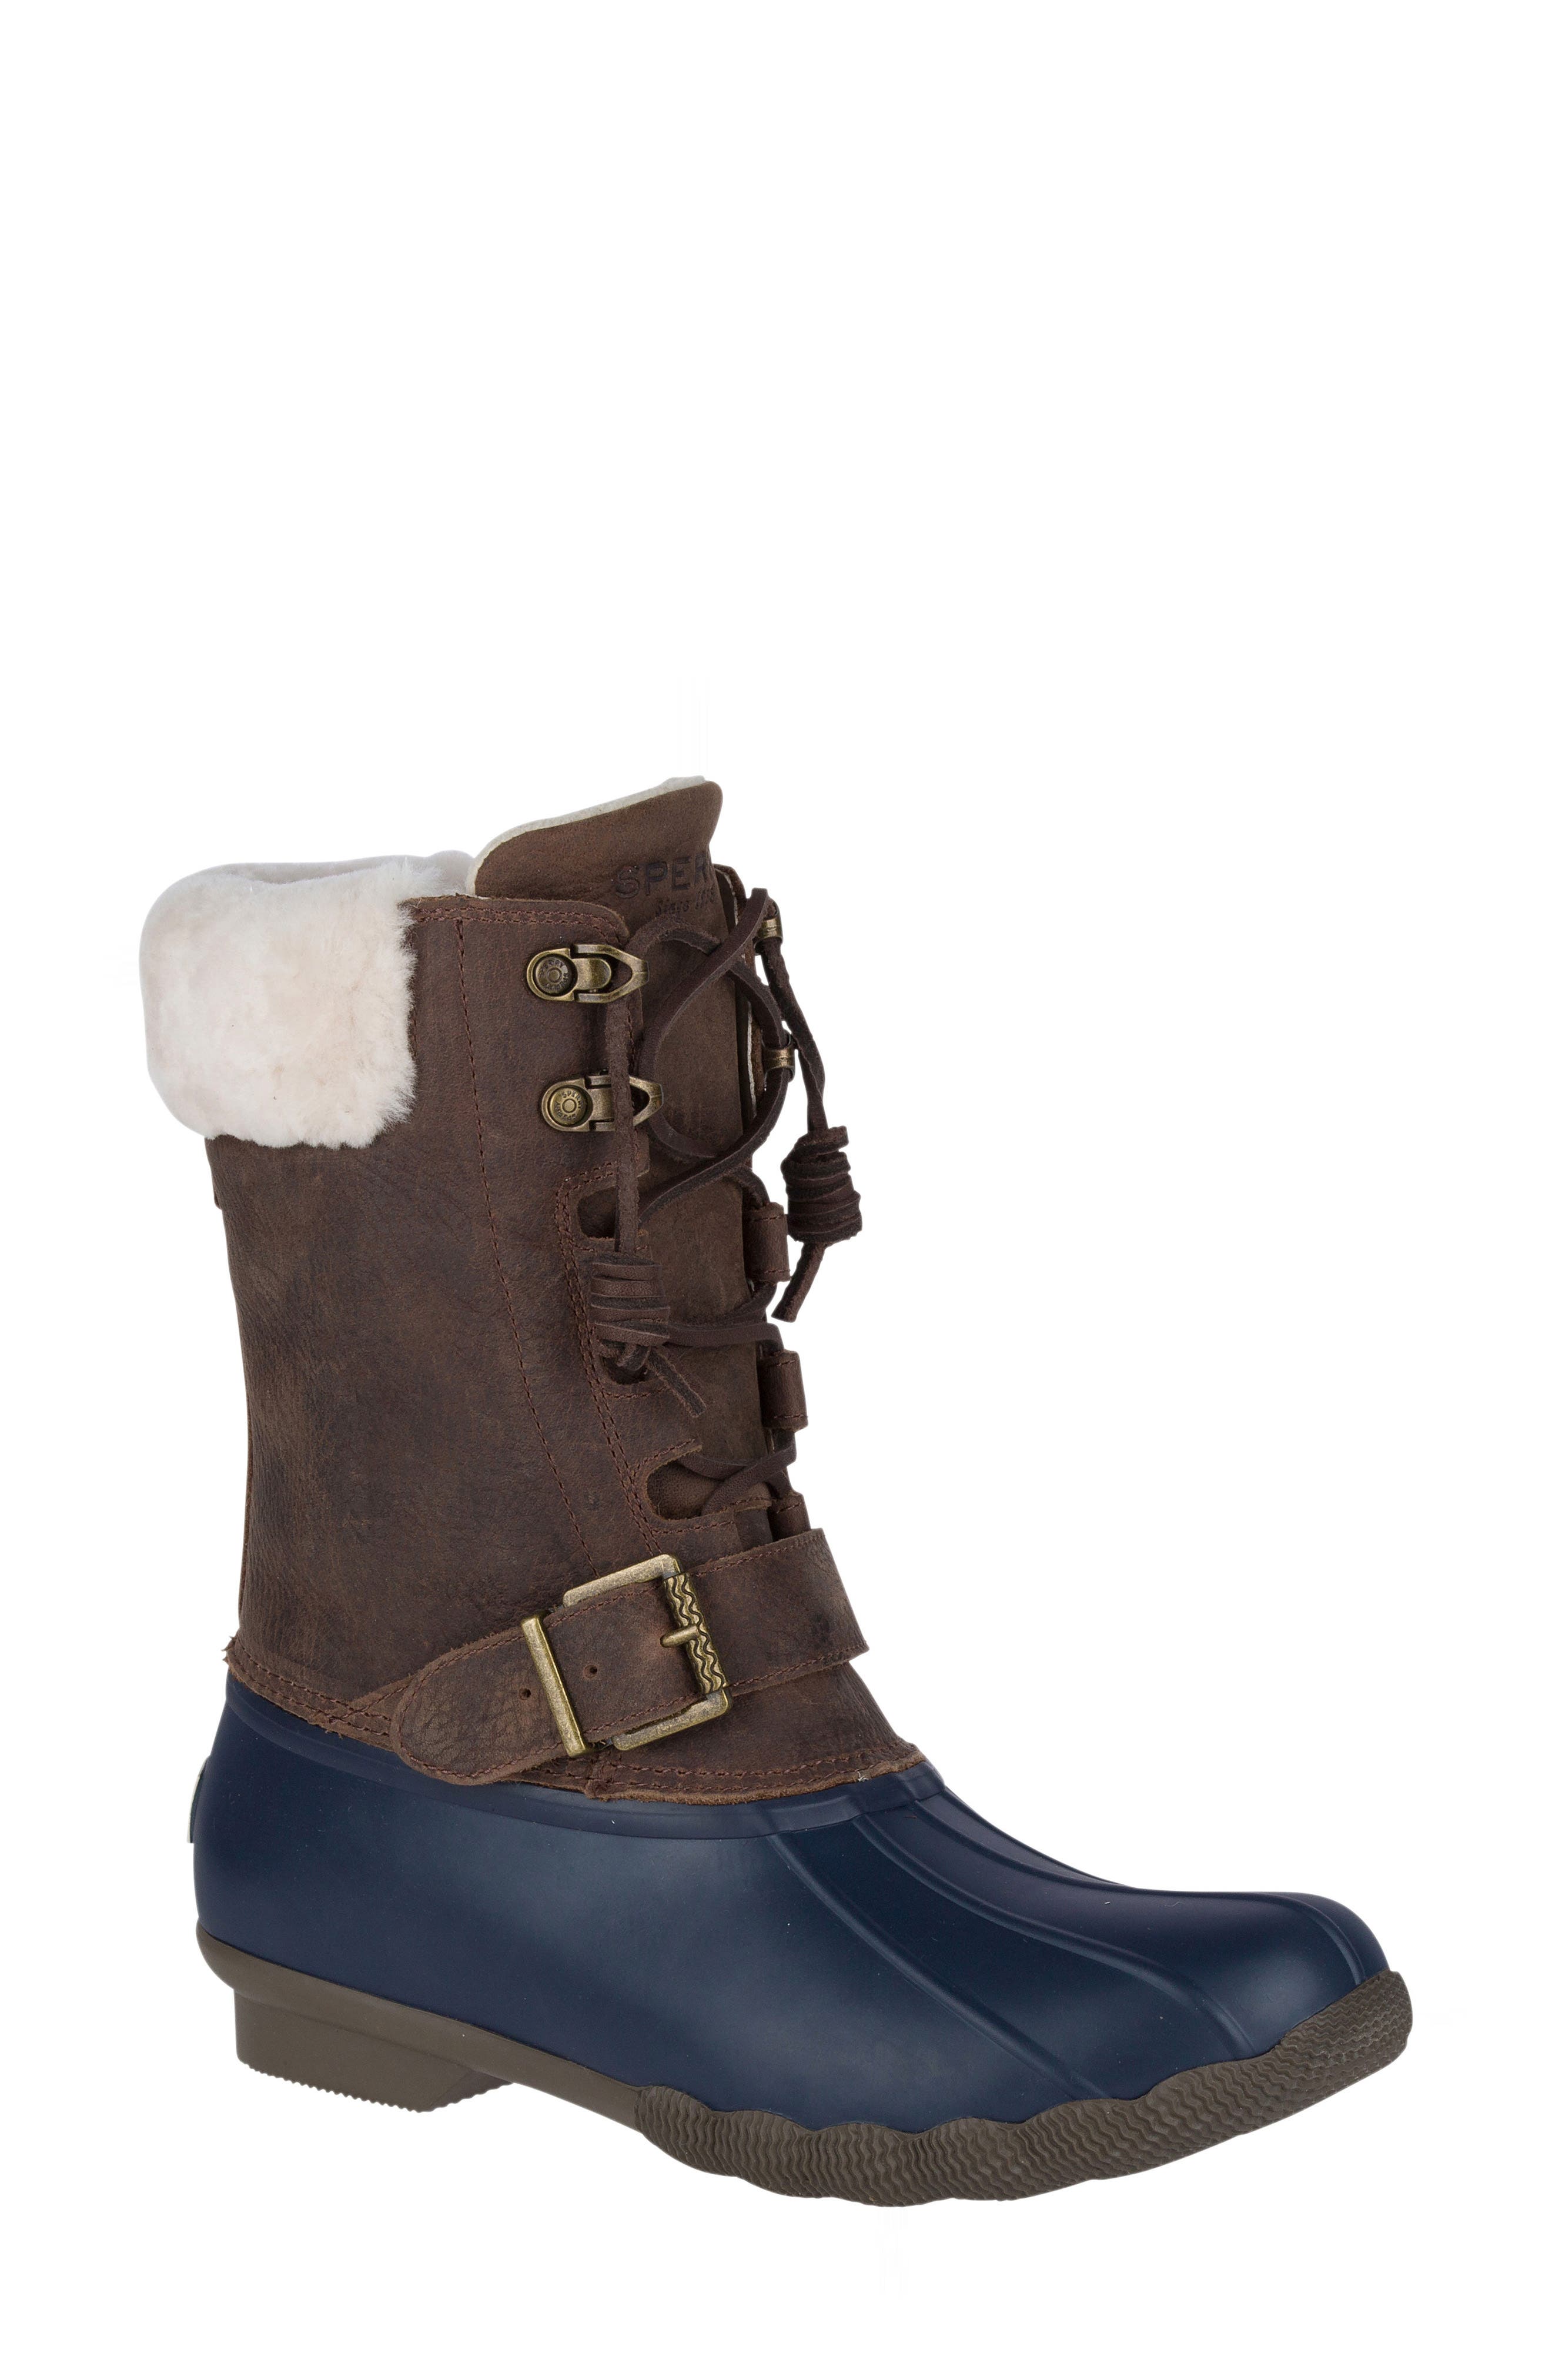 sperry shearling boots